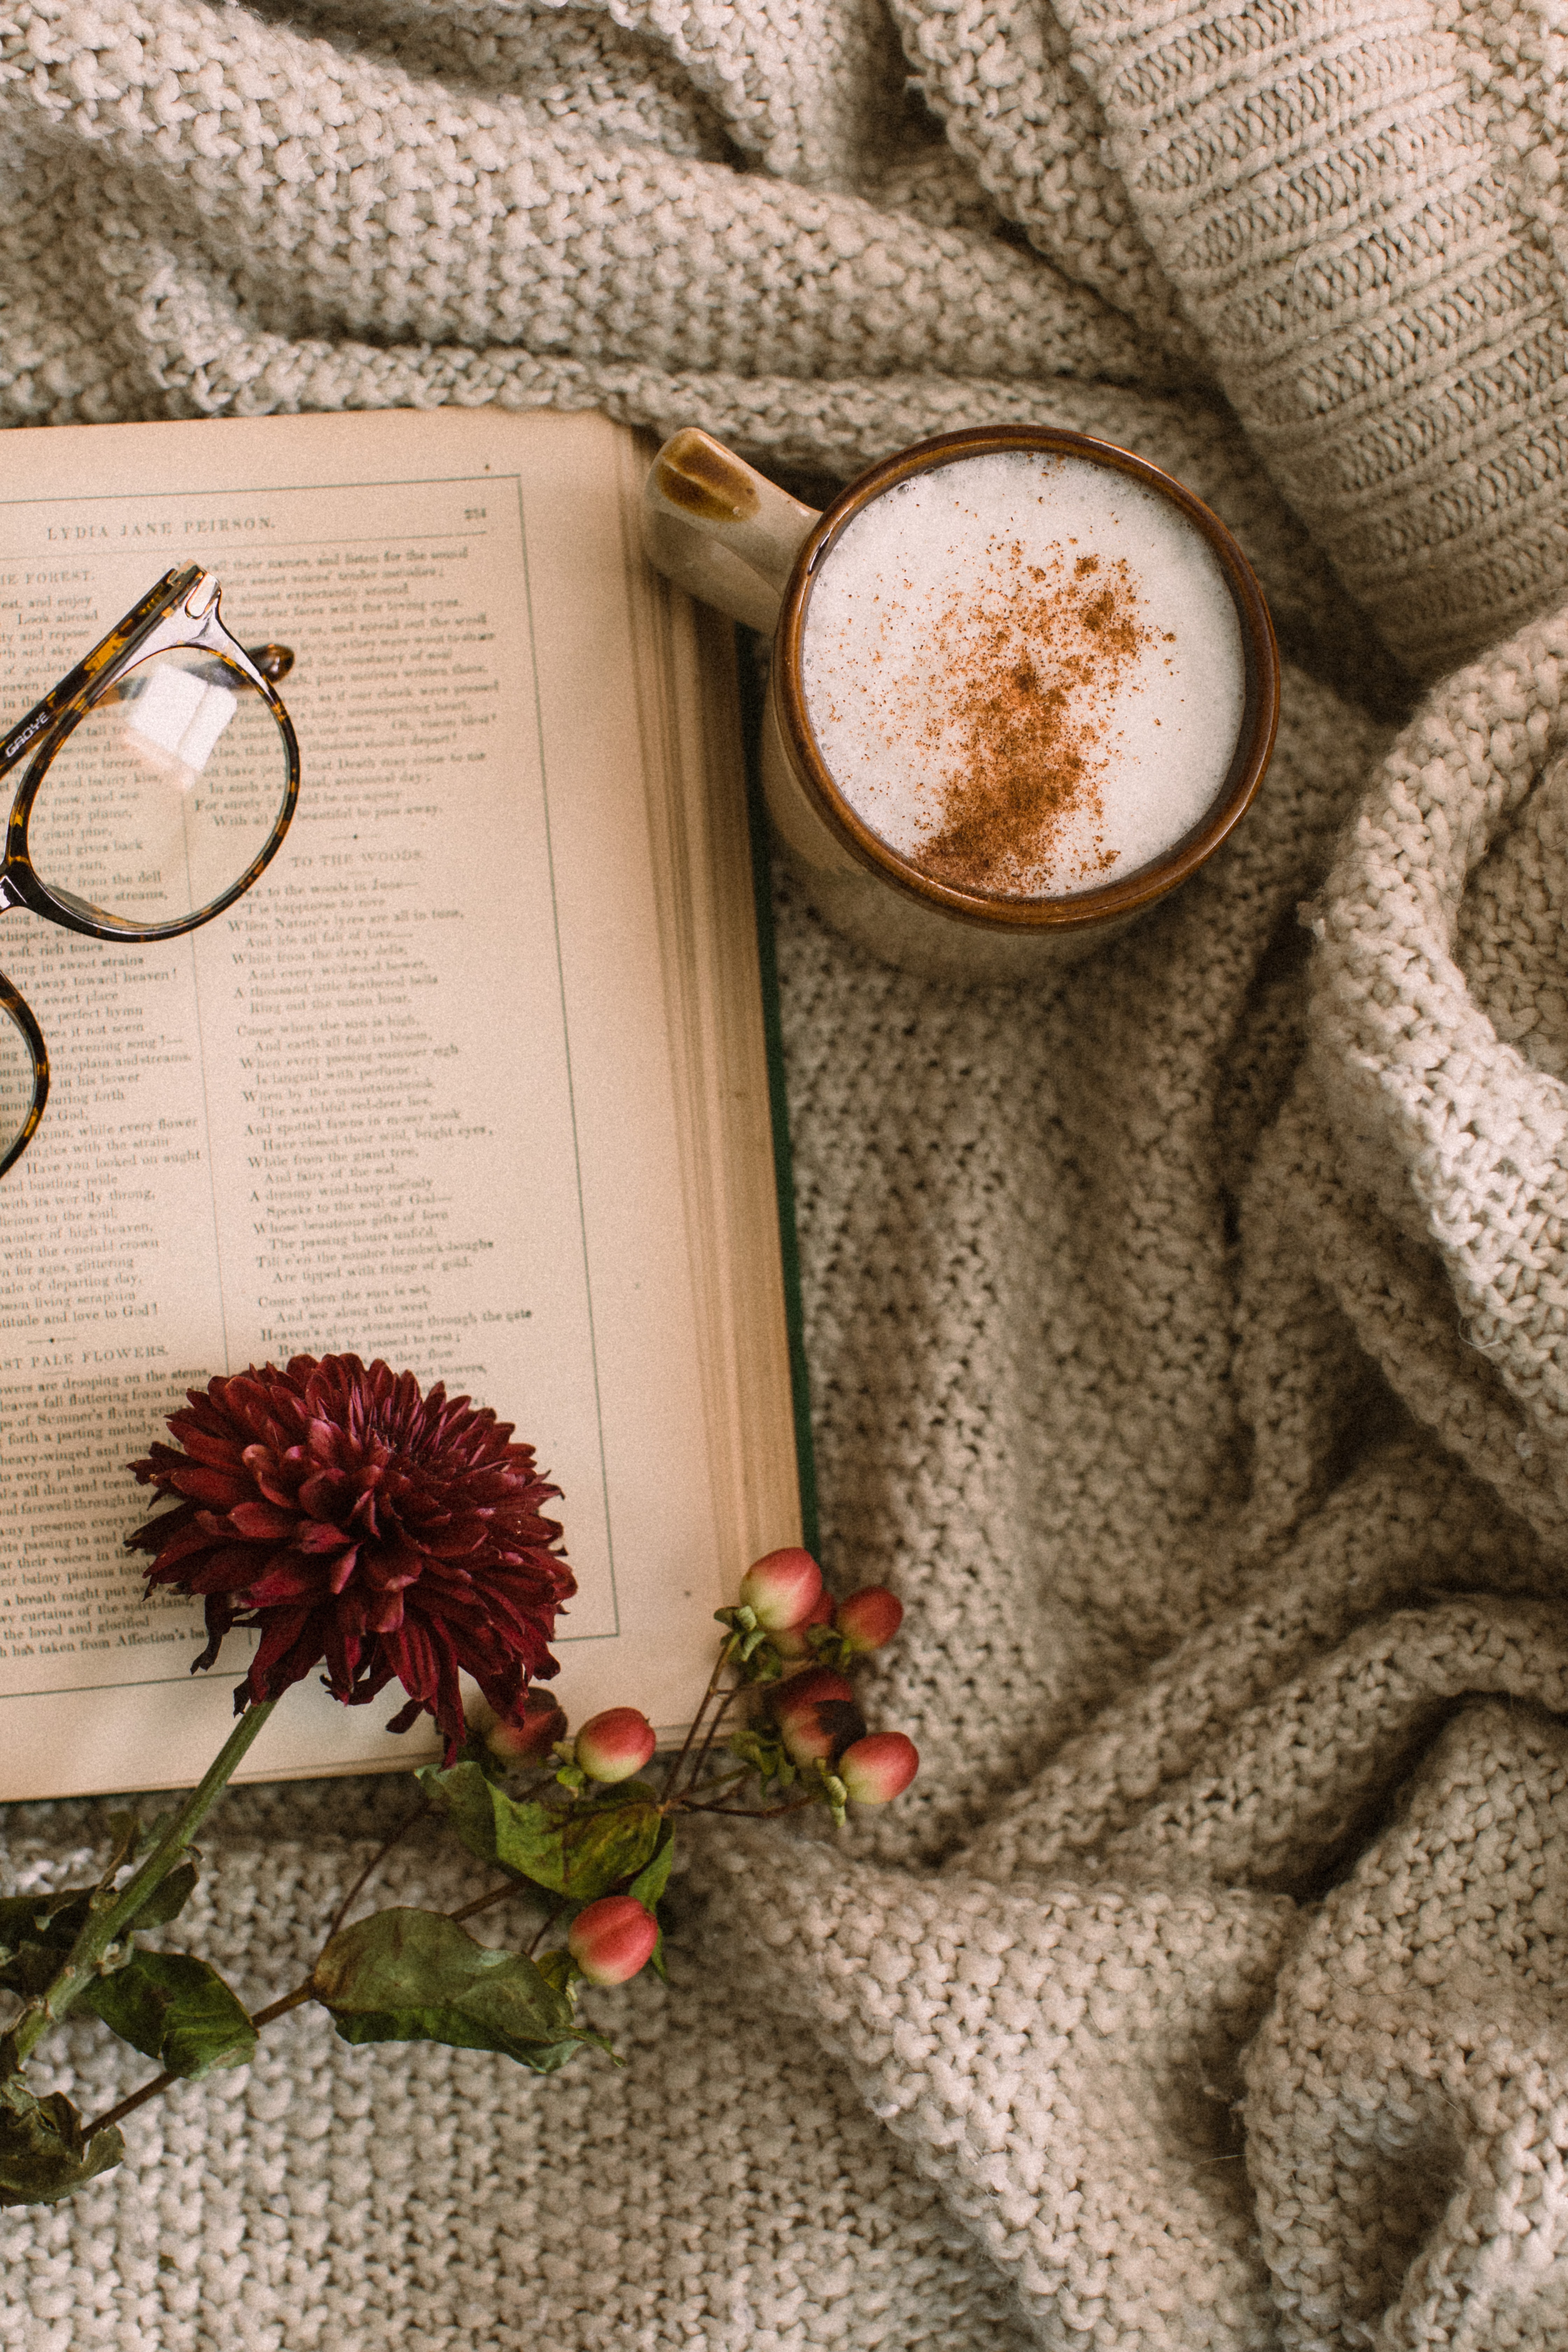 cup, food, book, spectacles, flowers, coffee, cappuccino, glasses, mug 2160p